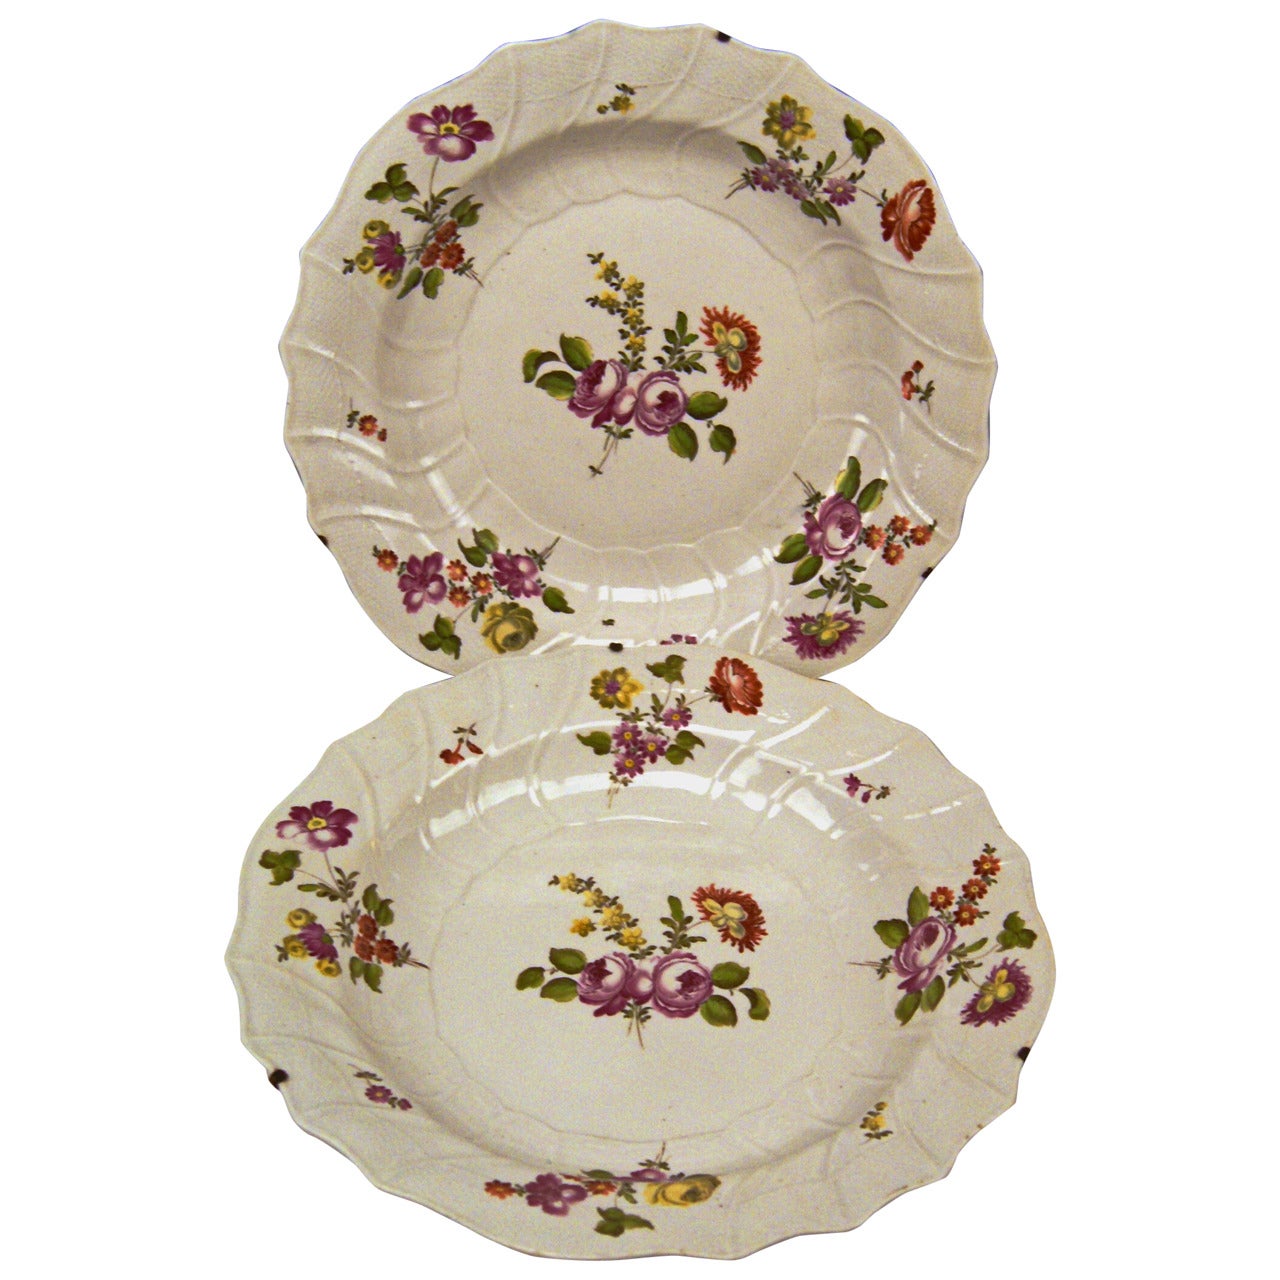 Two Huge Baroque, Imperial Viennese Porcelain Manufactory Plates, circa 1750